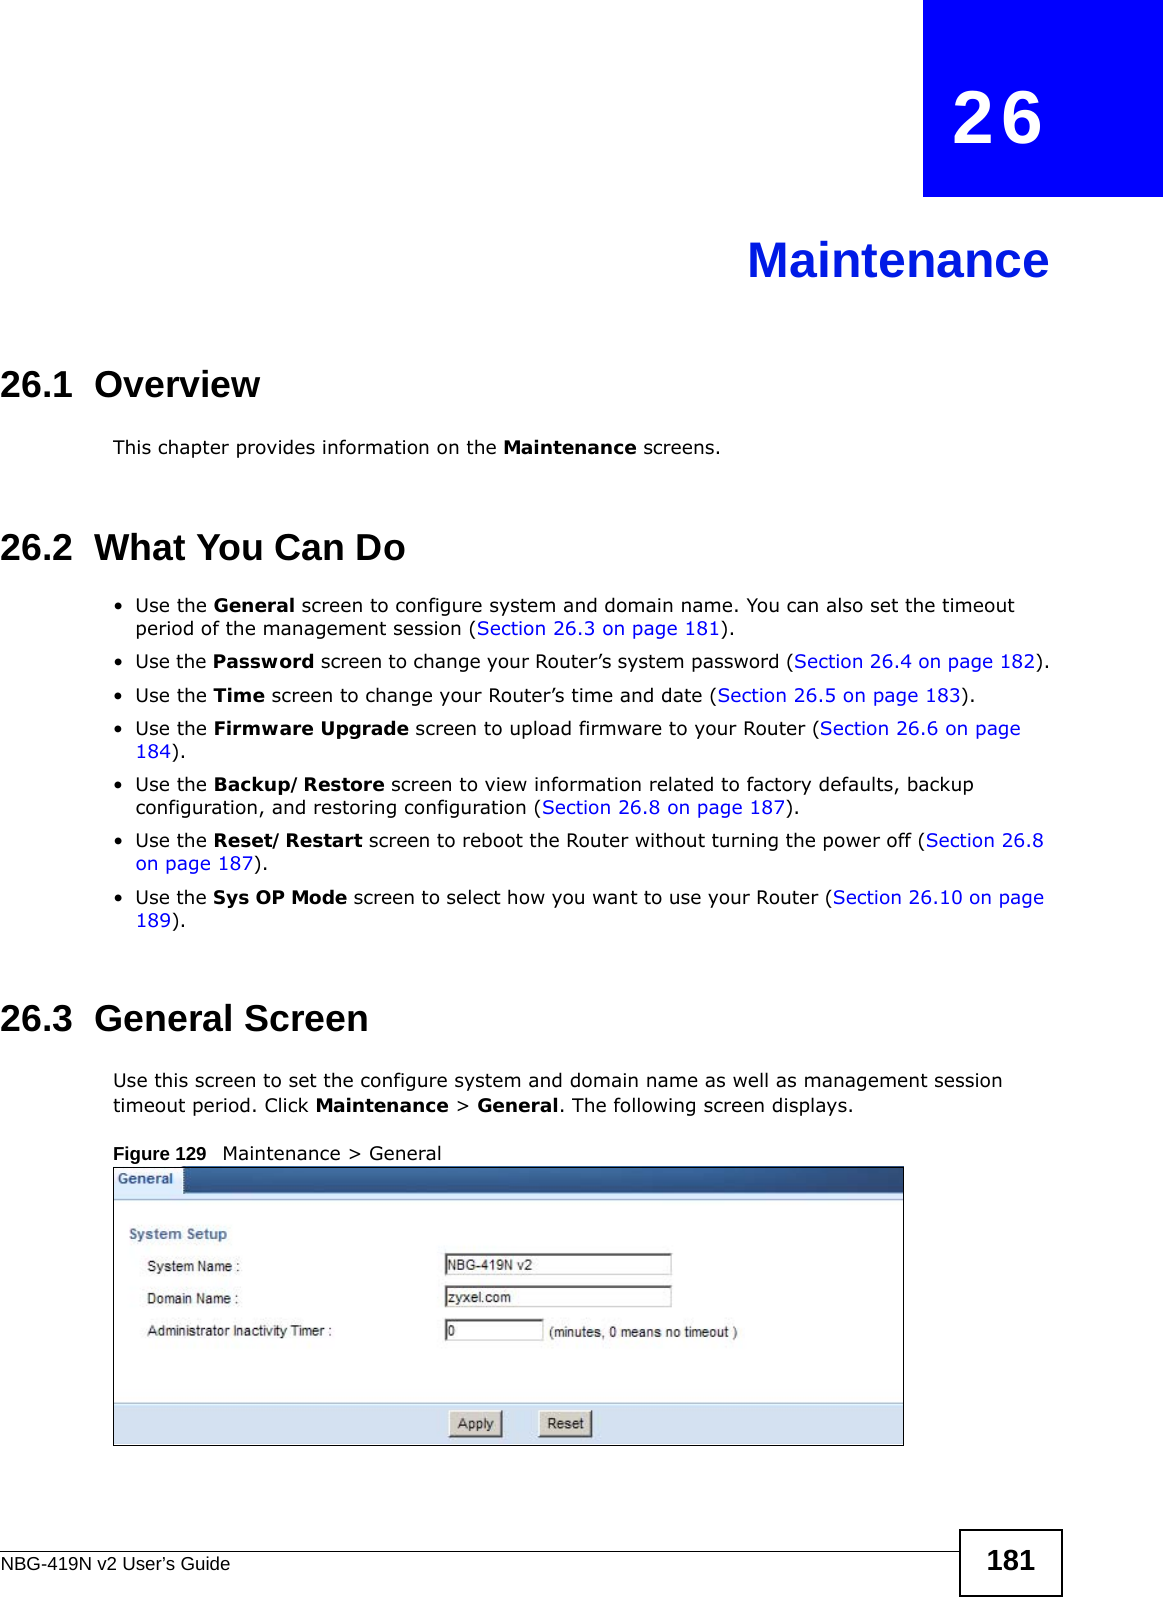 NBG-419N v2 User’s Guide 181CHAPTER   26Maintenance26.1  OverviewThis chapter provides information on the Maintenance screens. 26.2  What You Can Do•Use the General screen to configure system and domain name. You can also set the timeout period of the management session (Section 26.3 on page 181). •Use the Password screen to change your Router’s system password (Section 26.4 on page 182).•Use the Time screen to change your Router’s time and date (Section 26.5 on page 183).•Use the Firmware Upgrade screen to upload firmware to your Router (Section 26.6 on page 184).•Use the Backup/Restore screen to view information related to factory defaults, backup configuration, and restoring configuration (Section 26.8 on page 187).•Use the Reset/Restart screen to reboot the Router without turning the power off (Section 26.8 on page 187).•Use the Sys OP Mode screen to select how you want to use your Router (Section 26.10 on page 189). 26.3  General Screen Use this screen to set the configure system and domain name as well as management session timeout period. Click Maintenance &gt; General. The following screen displays.Figure 129   Maintenance &gt; General 